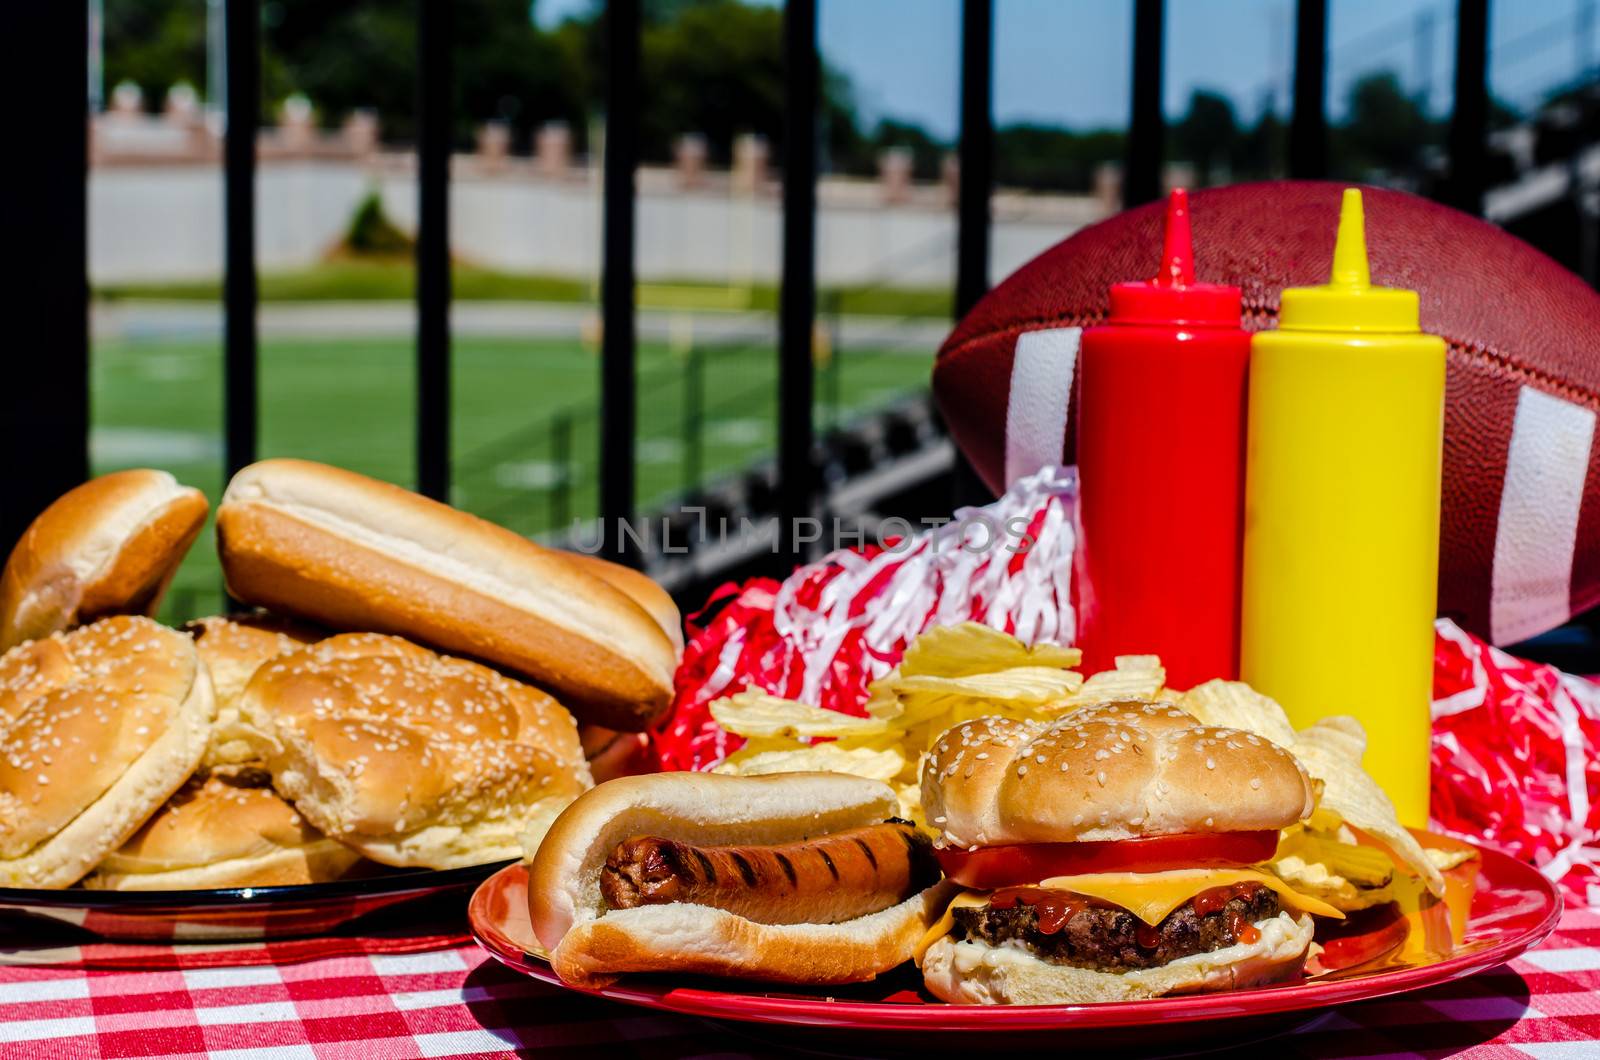 Football party with cheeseburger, hot dog, potato chips, pom poms, buns, and football.  Football field in background.